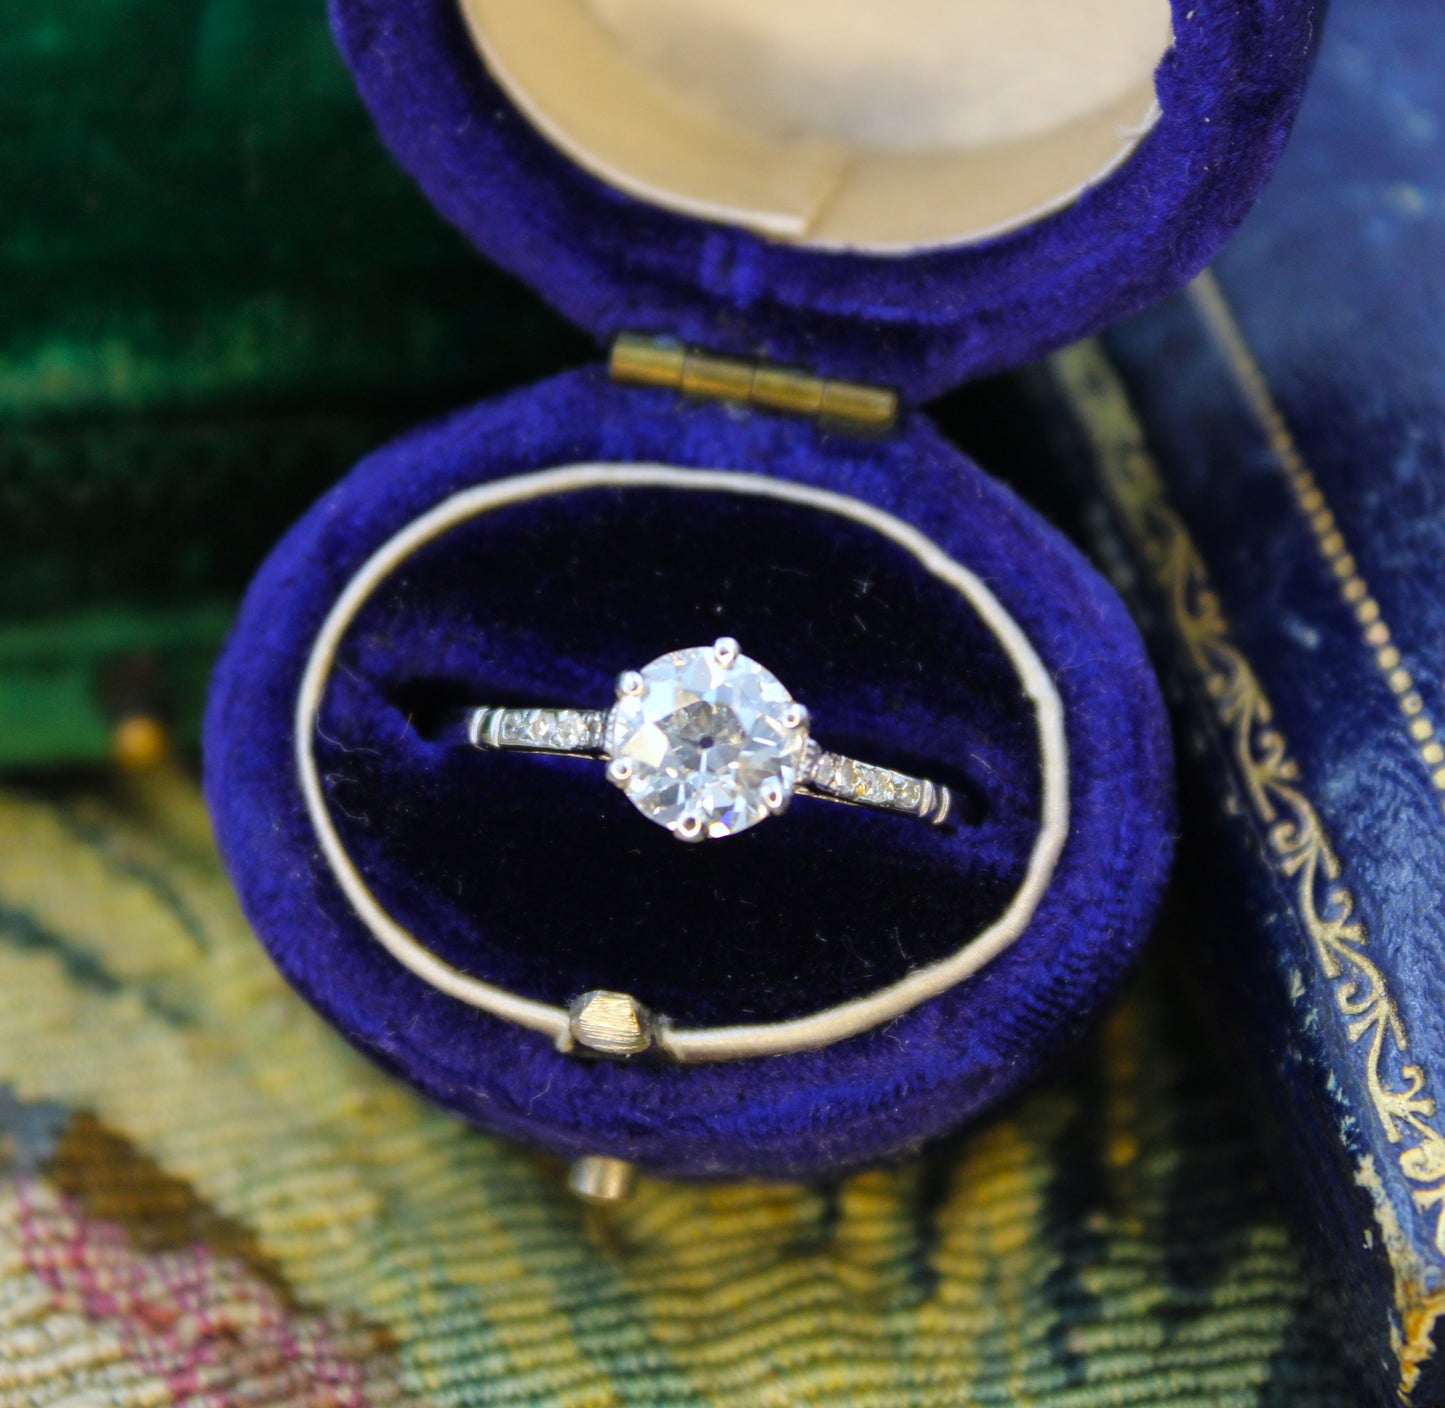 A very fine 0.92 Carat Diamond Solitaire Engagement Ring, mounted in Platinum, English. Circa 1930 - Robin Haydock Antiques